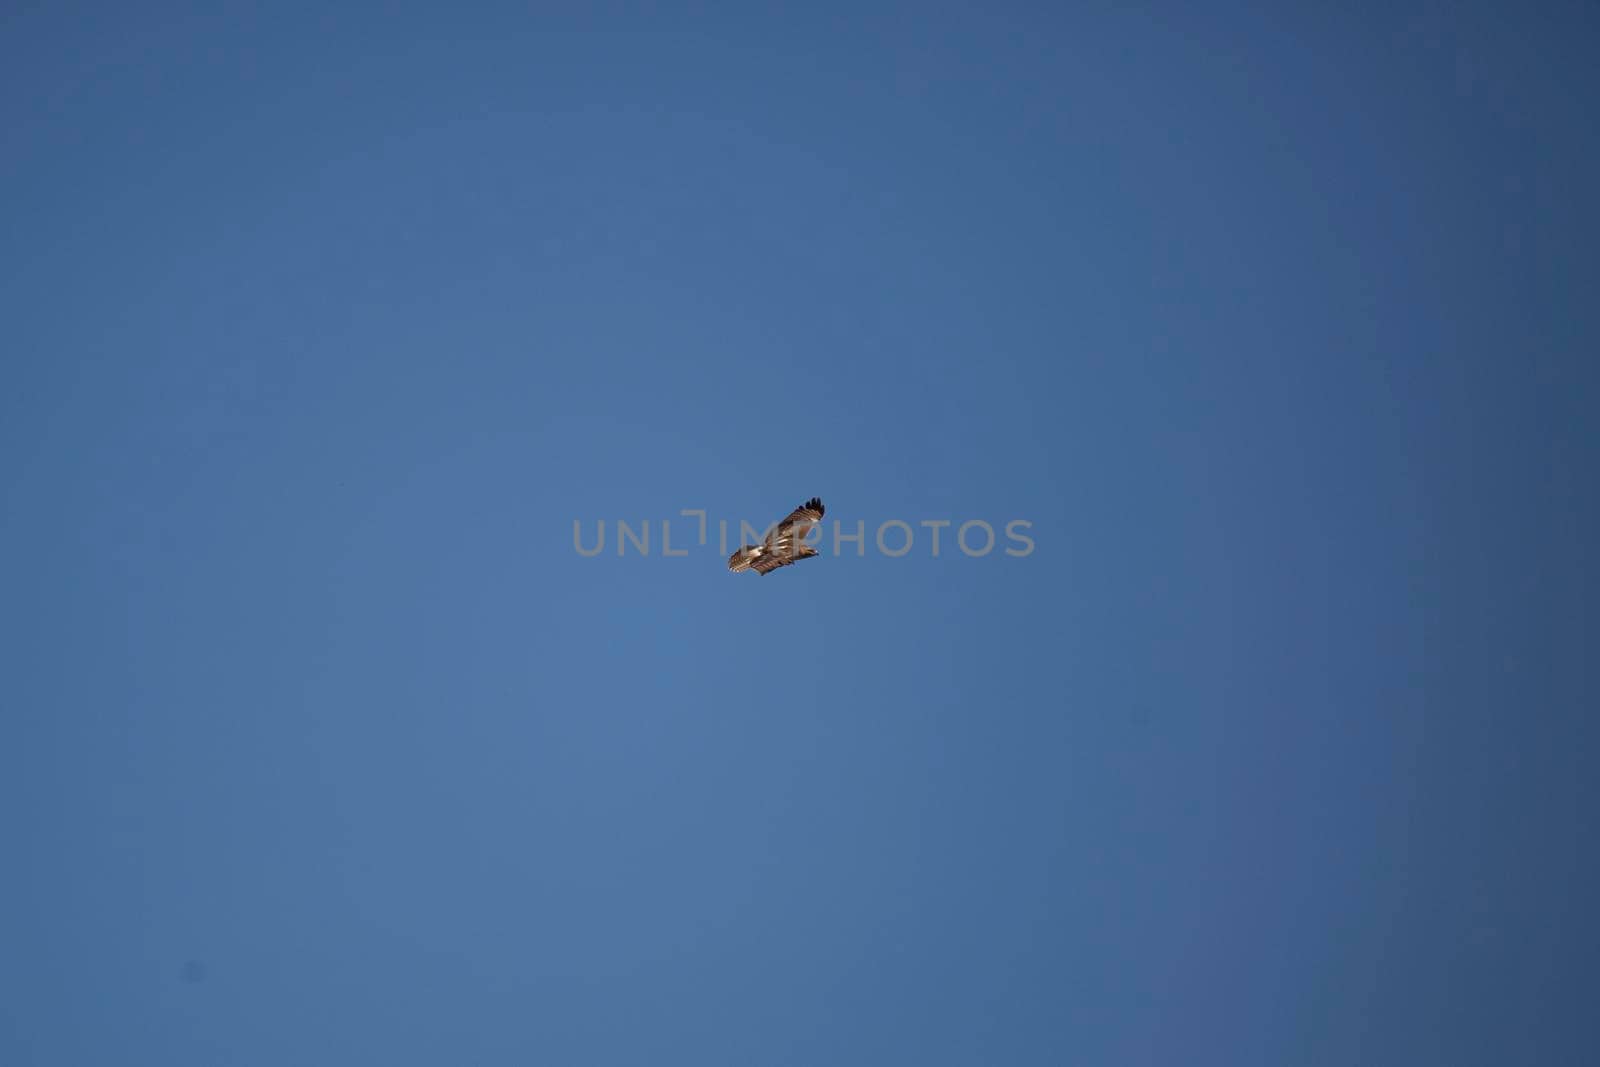 Krider's red-tailed hawk (Buteo jamaicensis) flying through a blue sky